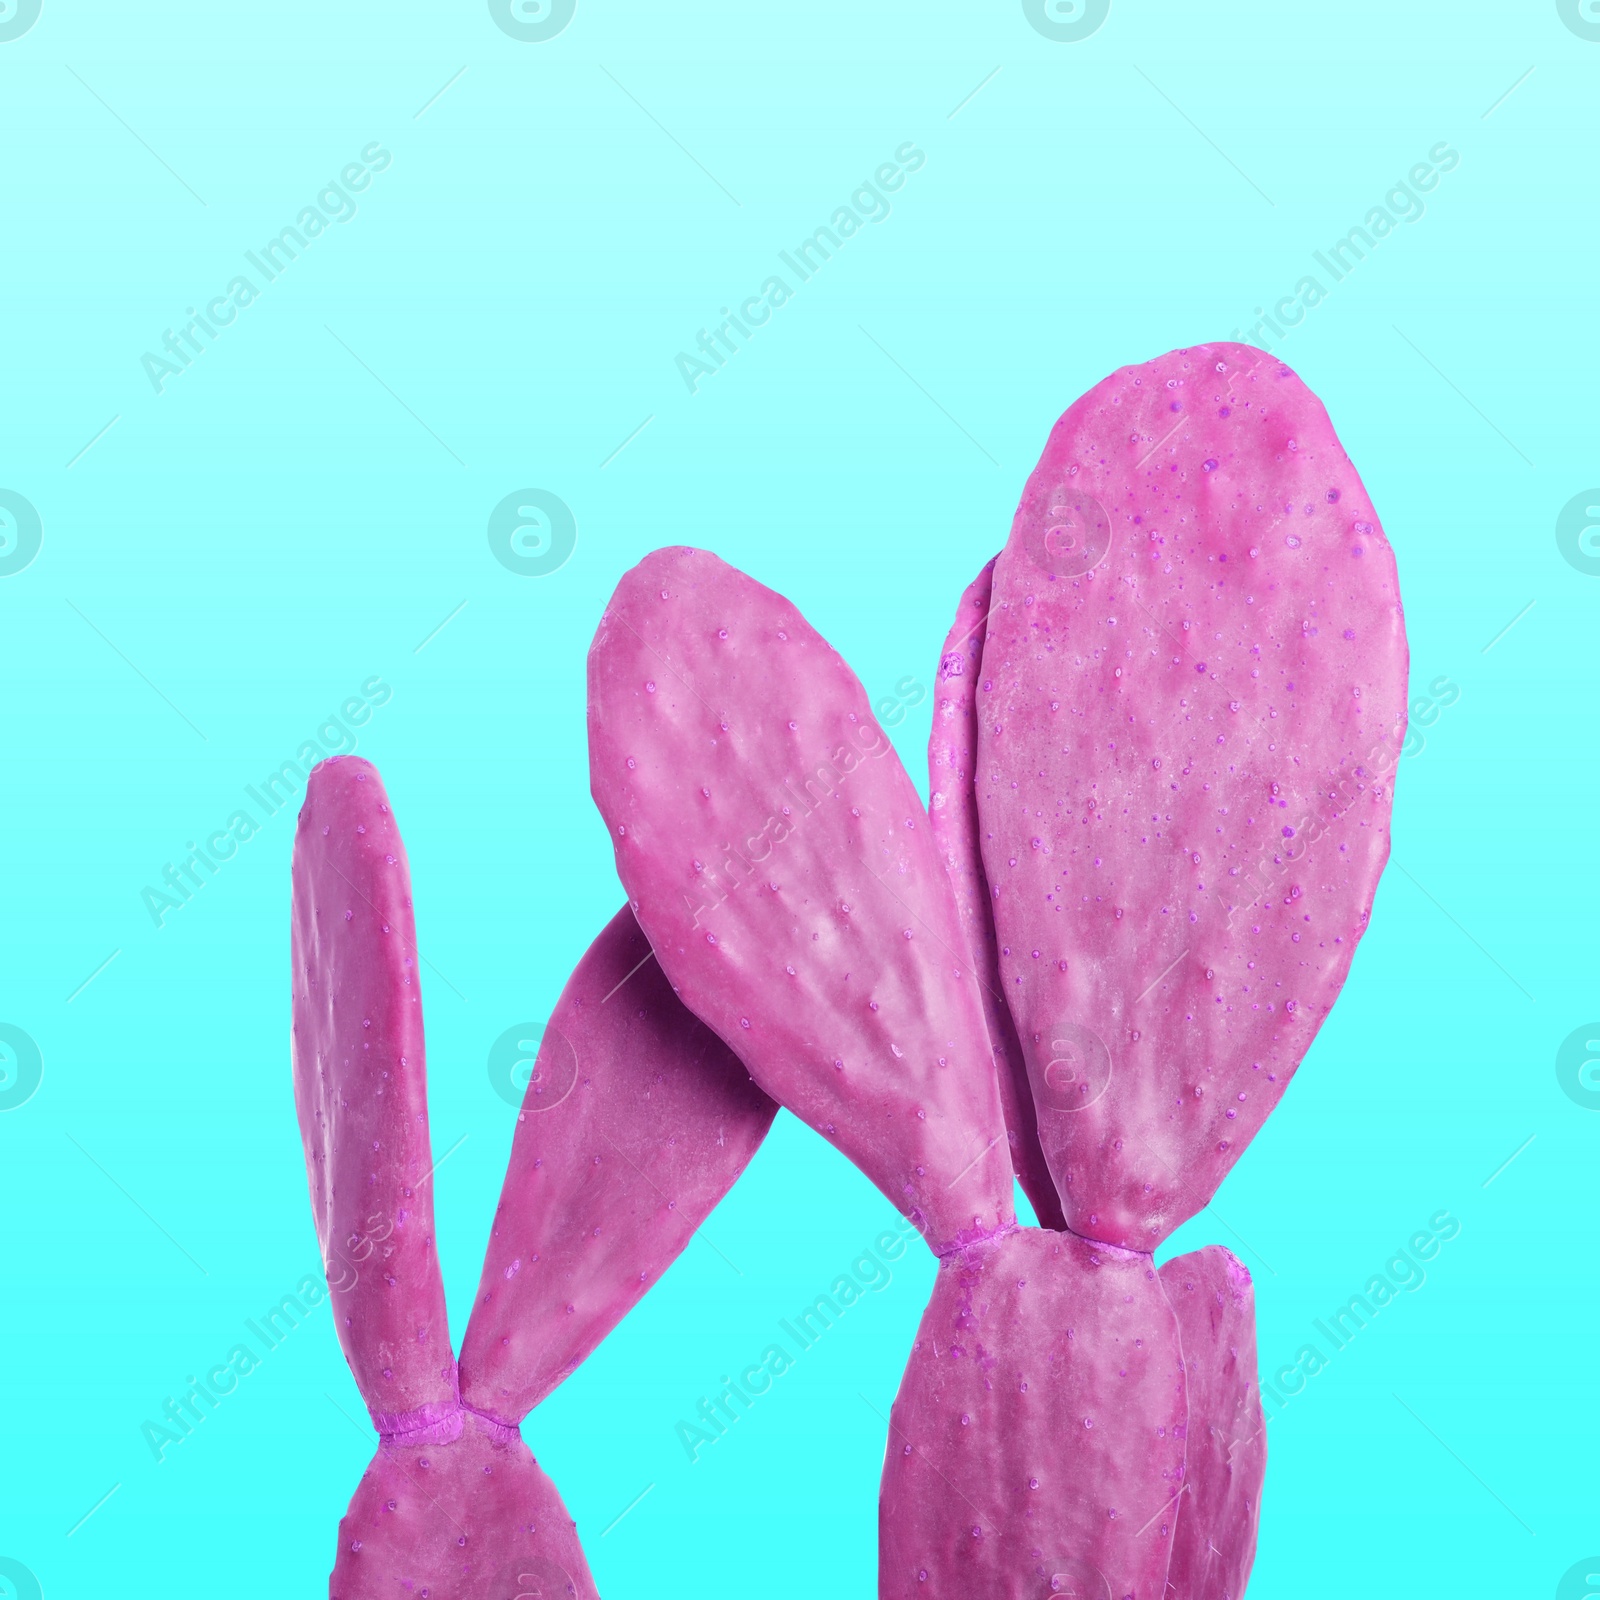 Image of Pink cactus on turquoise background. Creative design